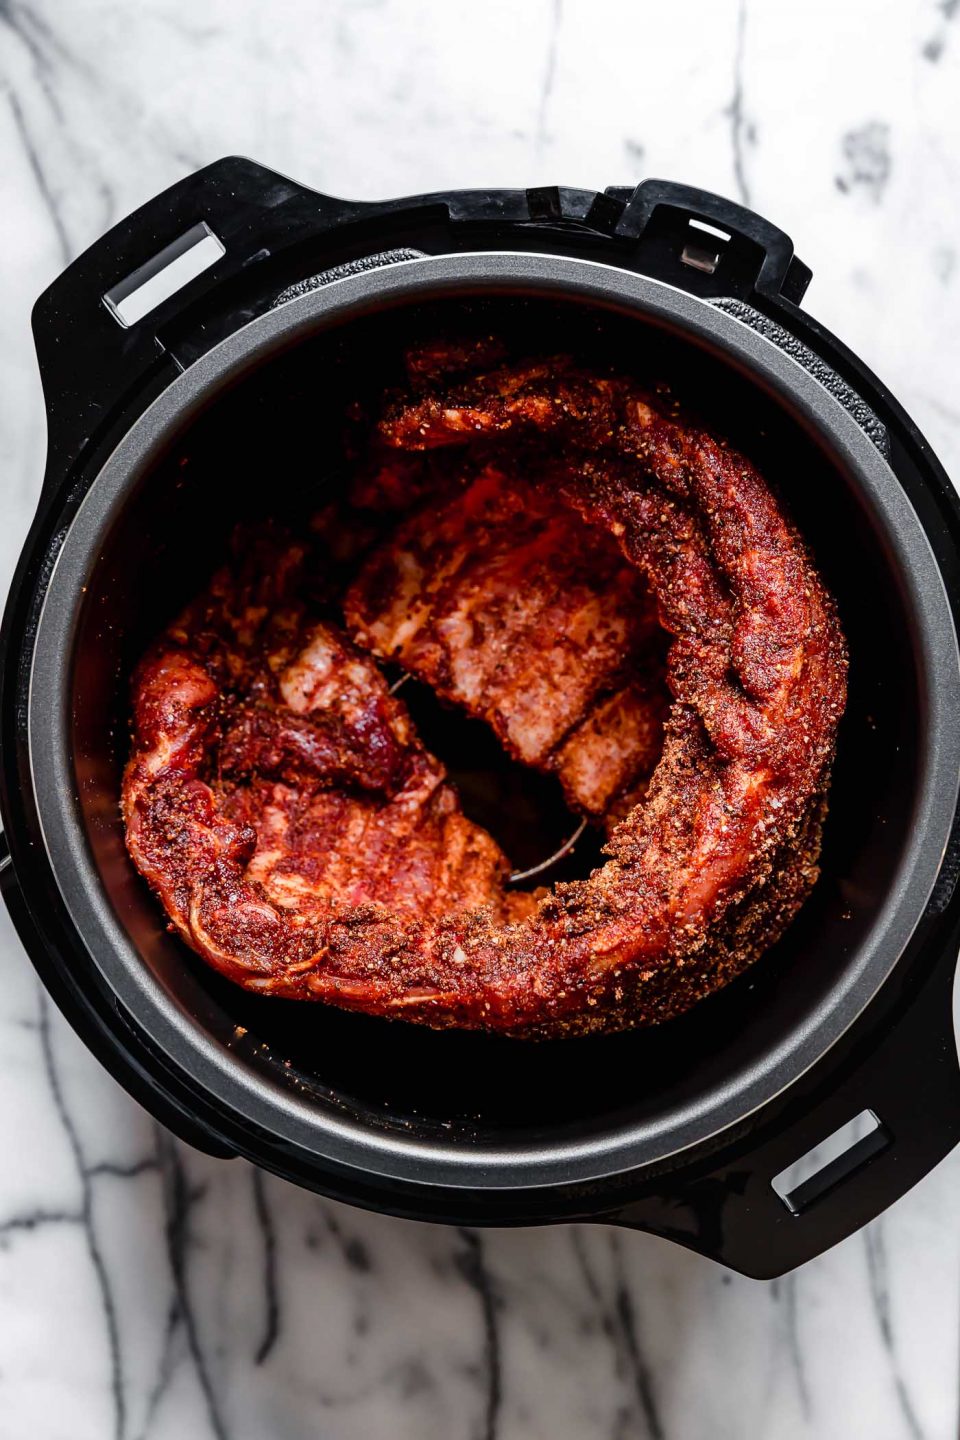 Seasoned ribs shown in electric pressure cooker prior to cooking.